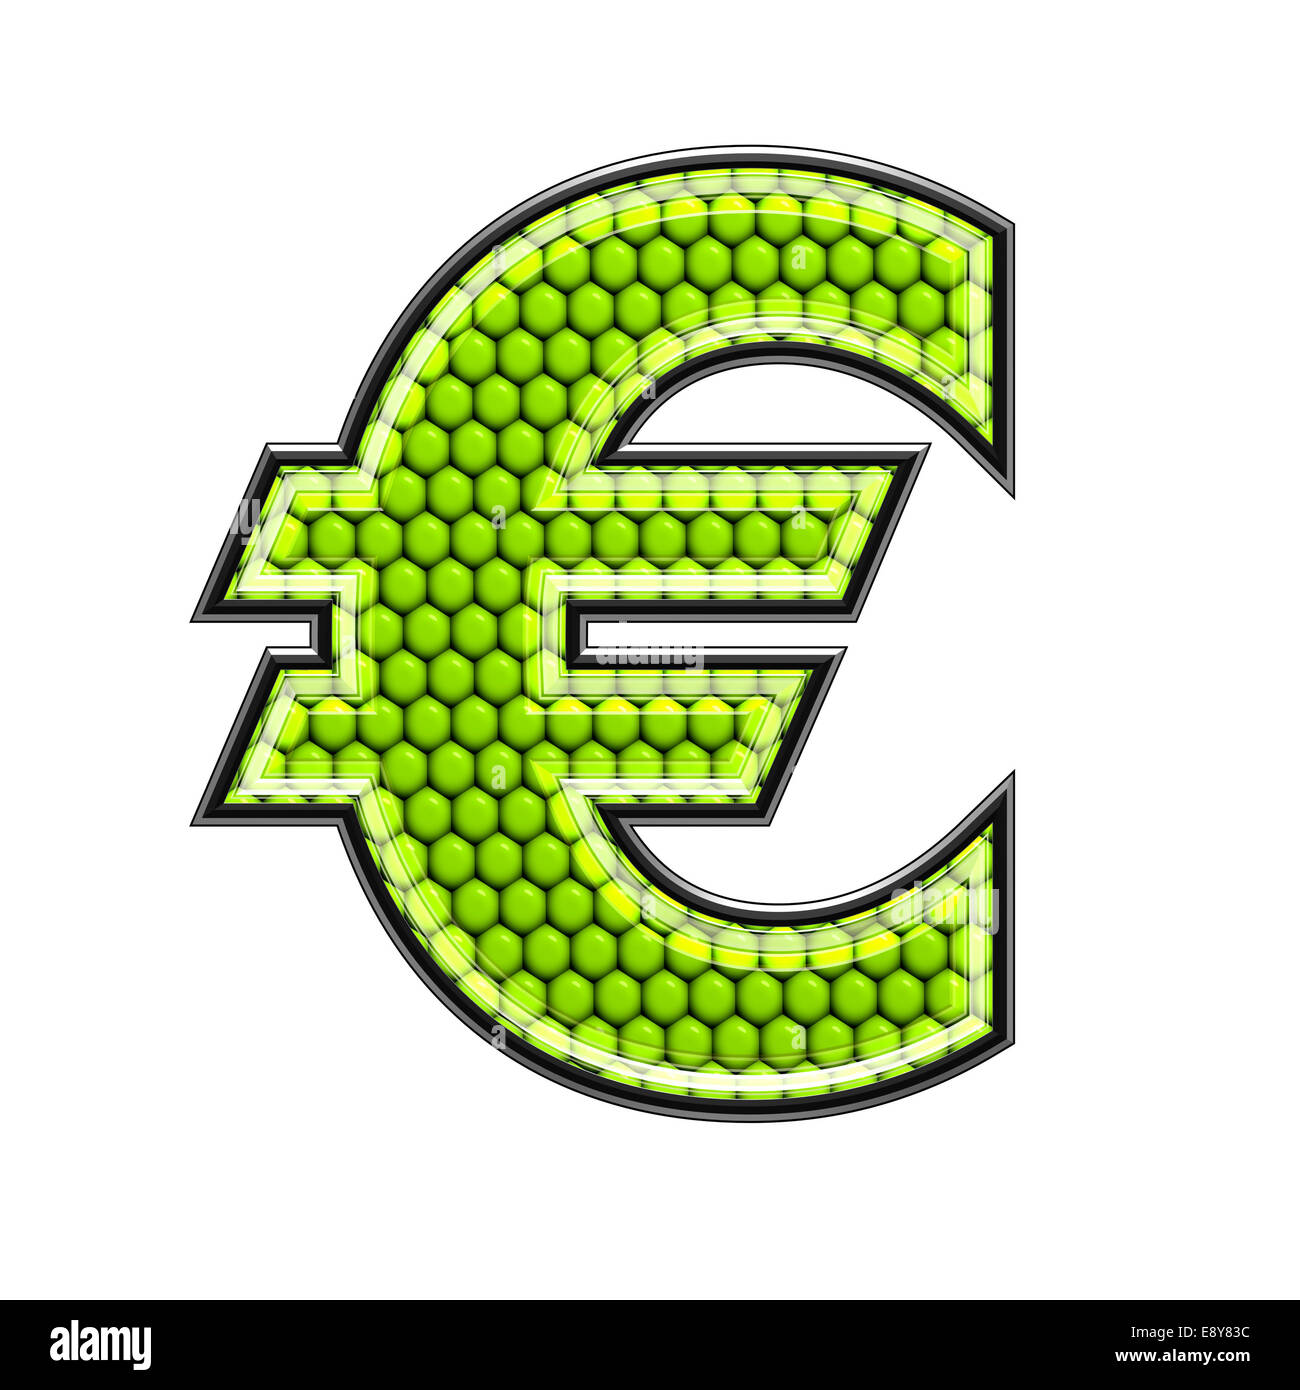 Abstract 3d currency sign with reptile skin texture - euros currency s Stock Photo